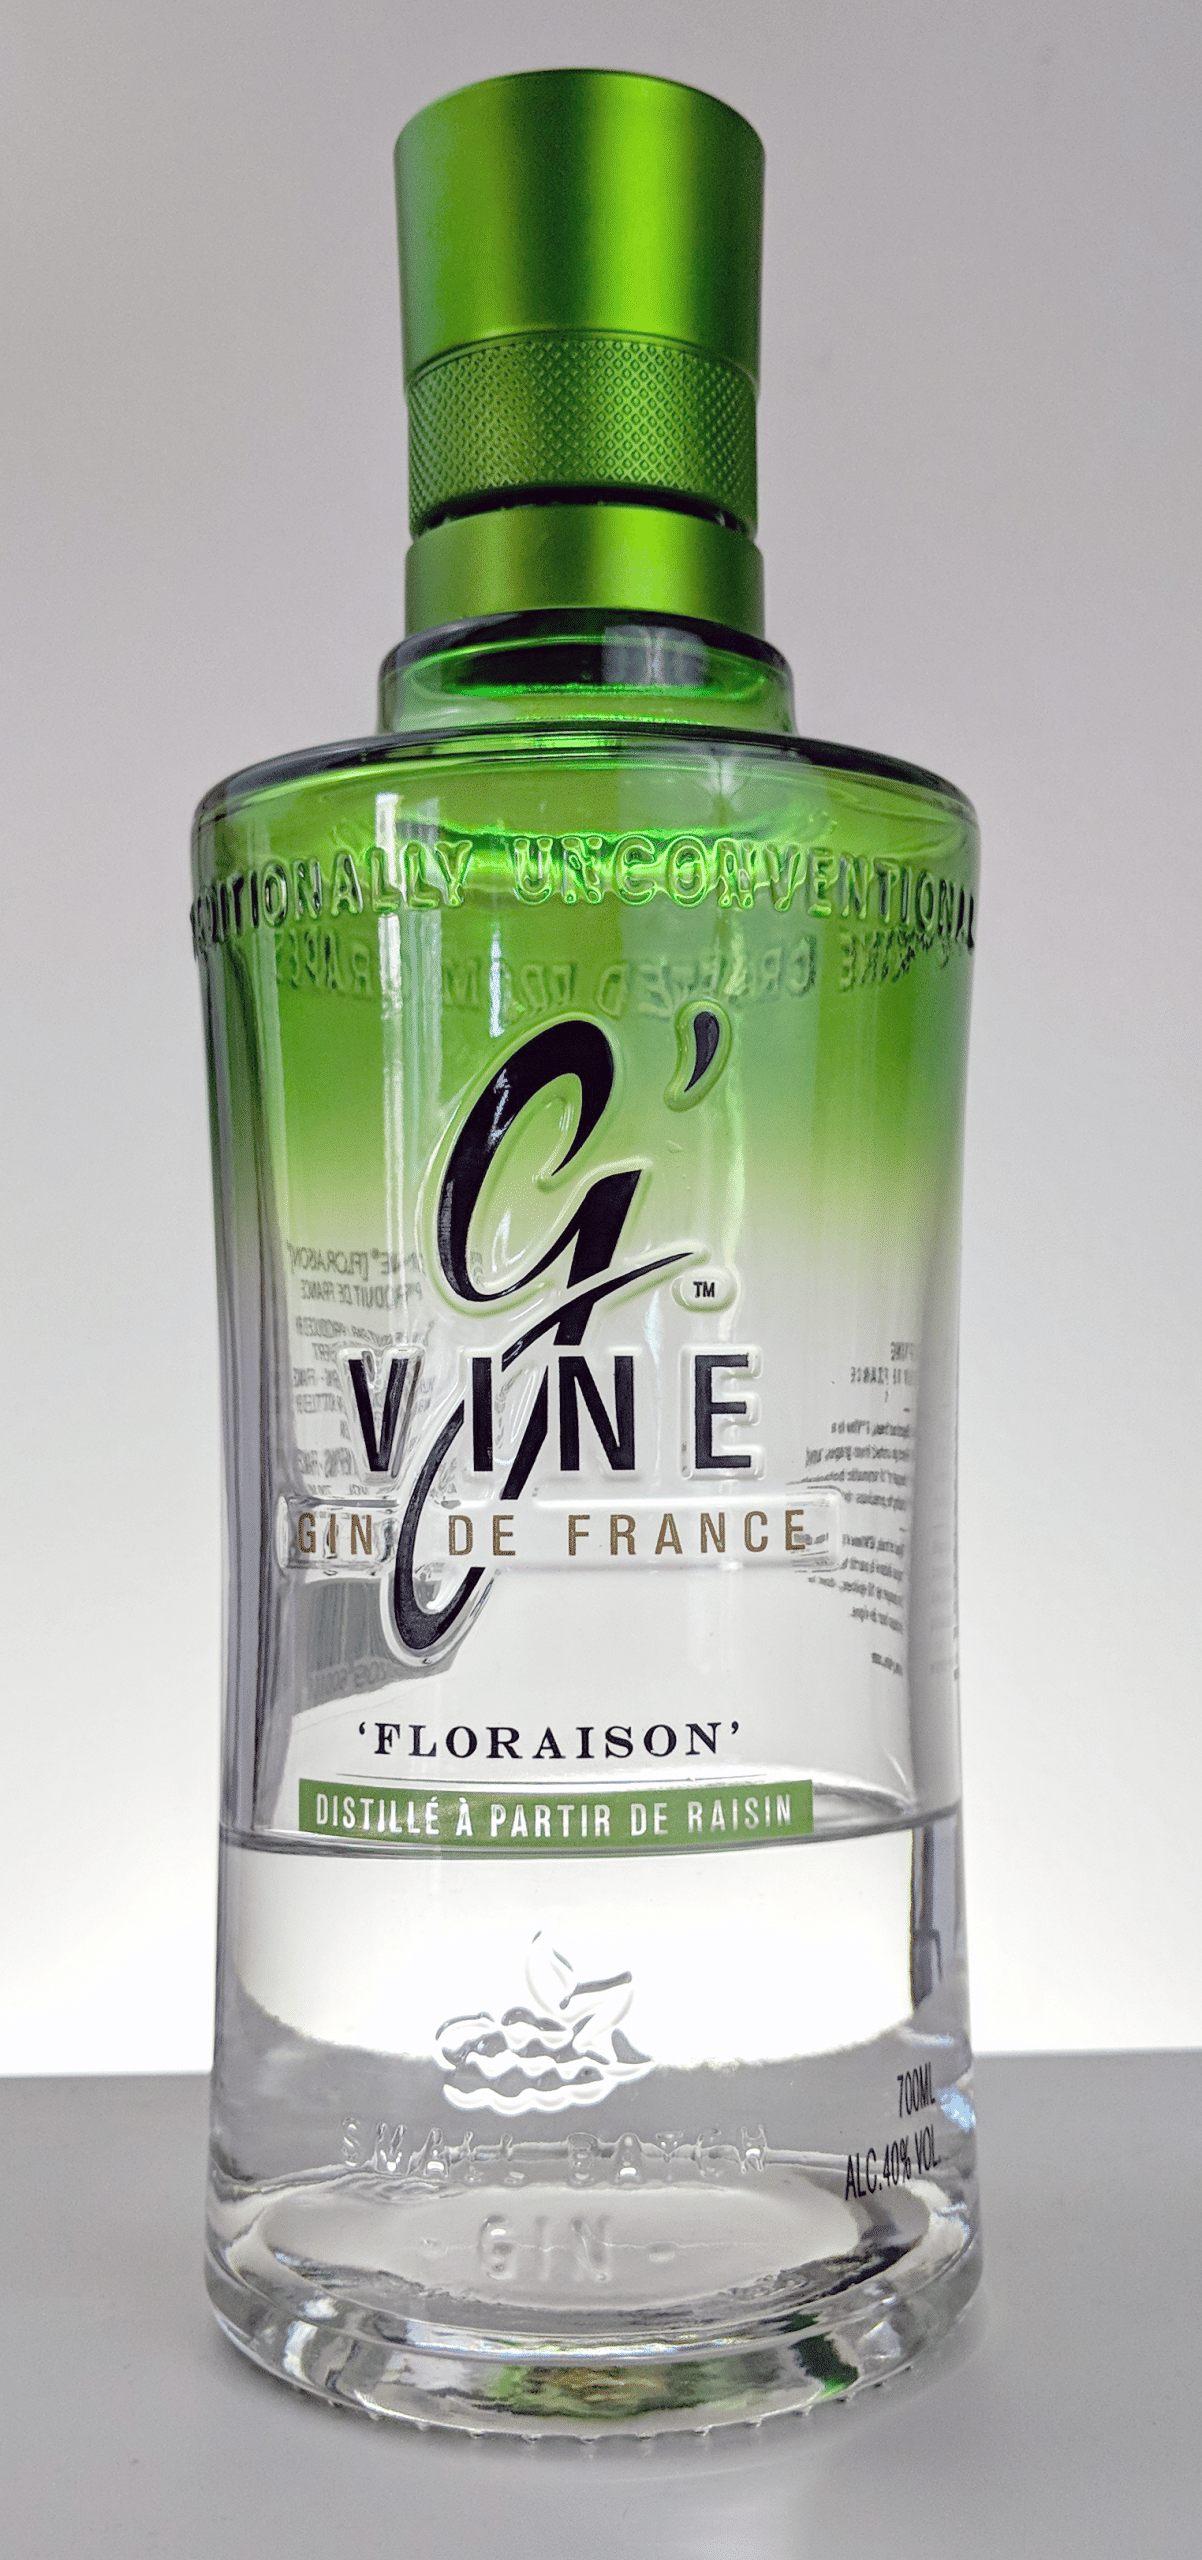 G\'vine Floraison | Expert Gin Review and Tasting Notes